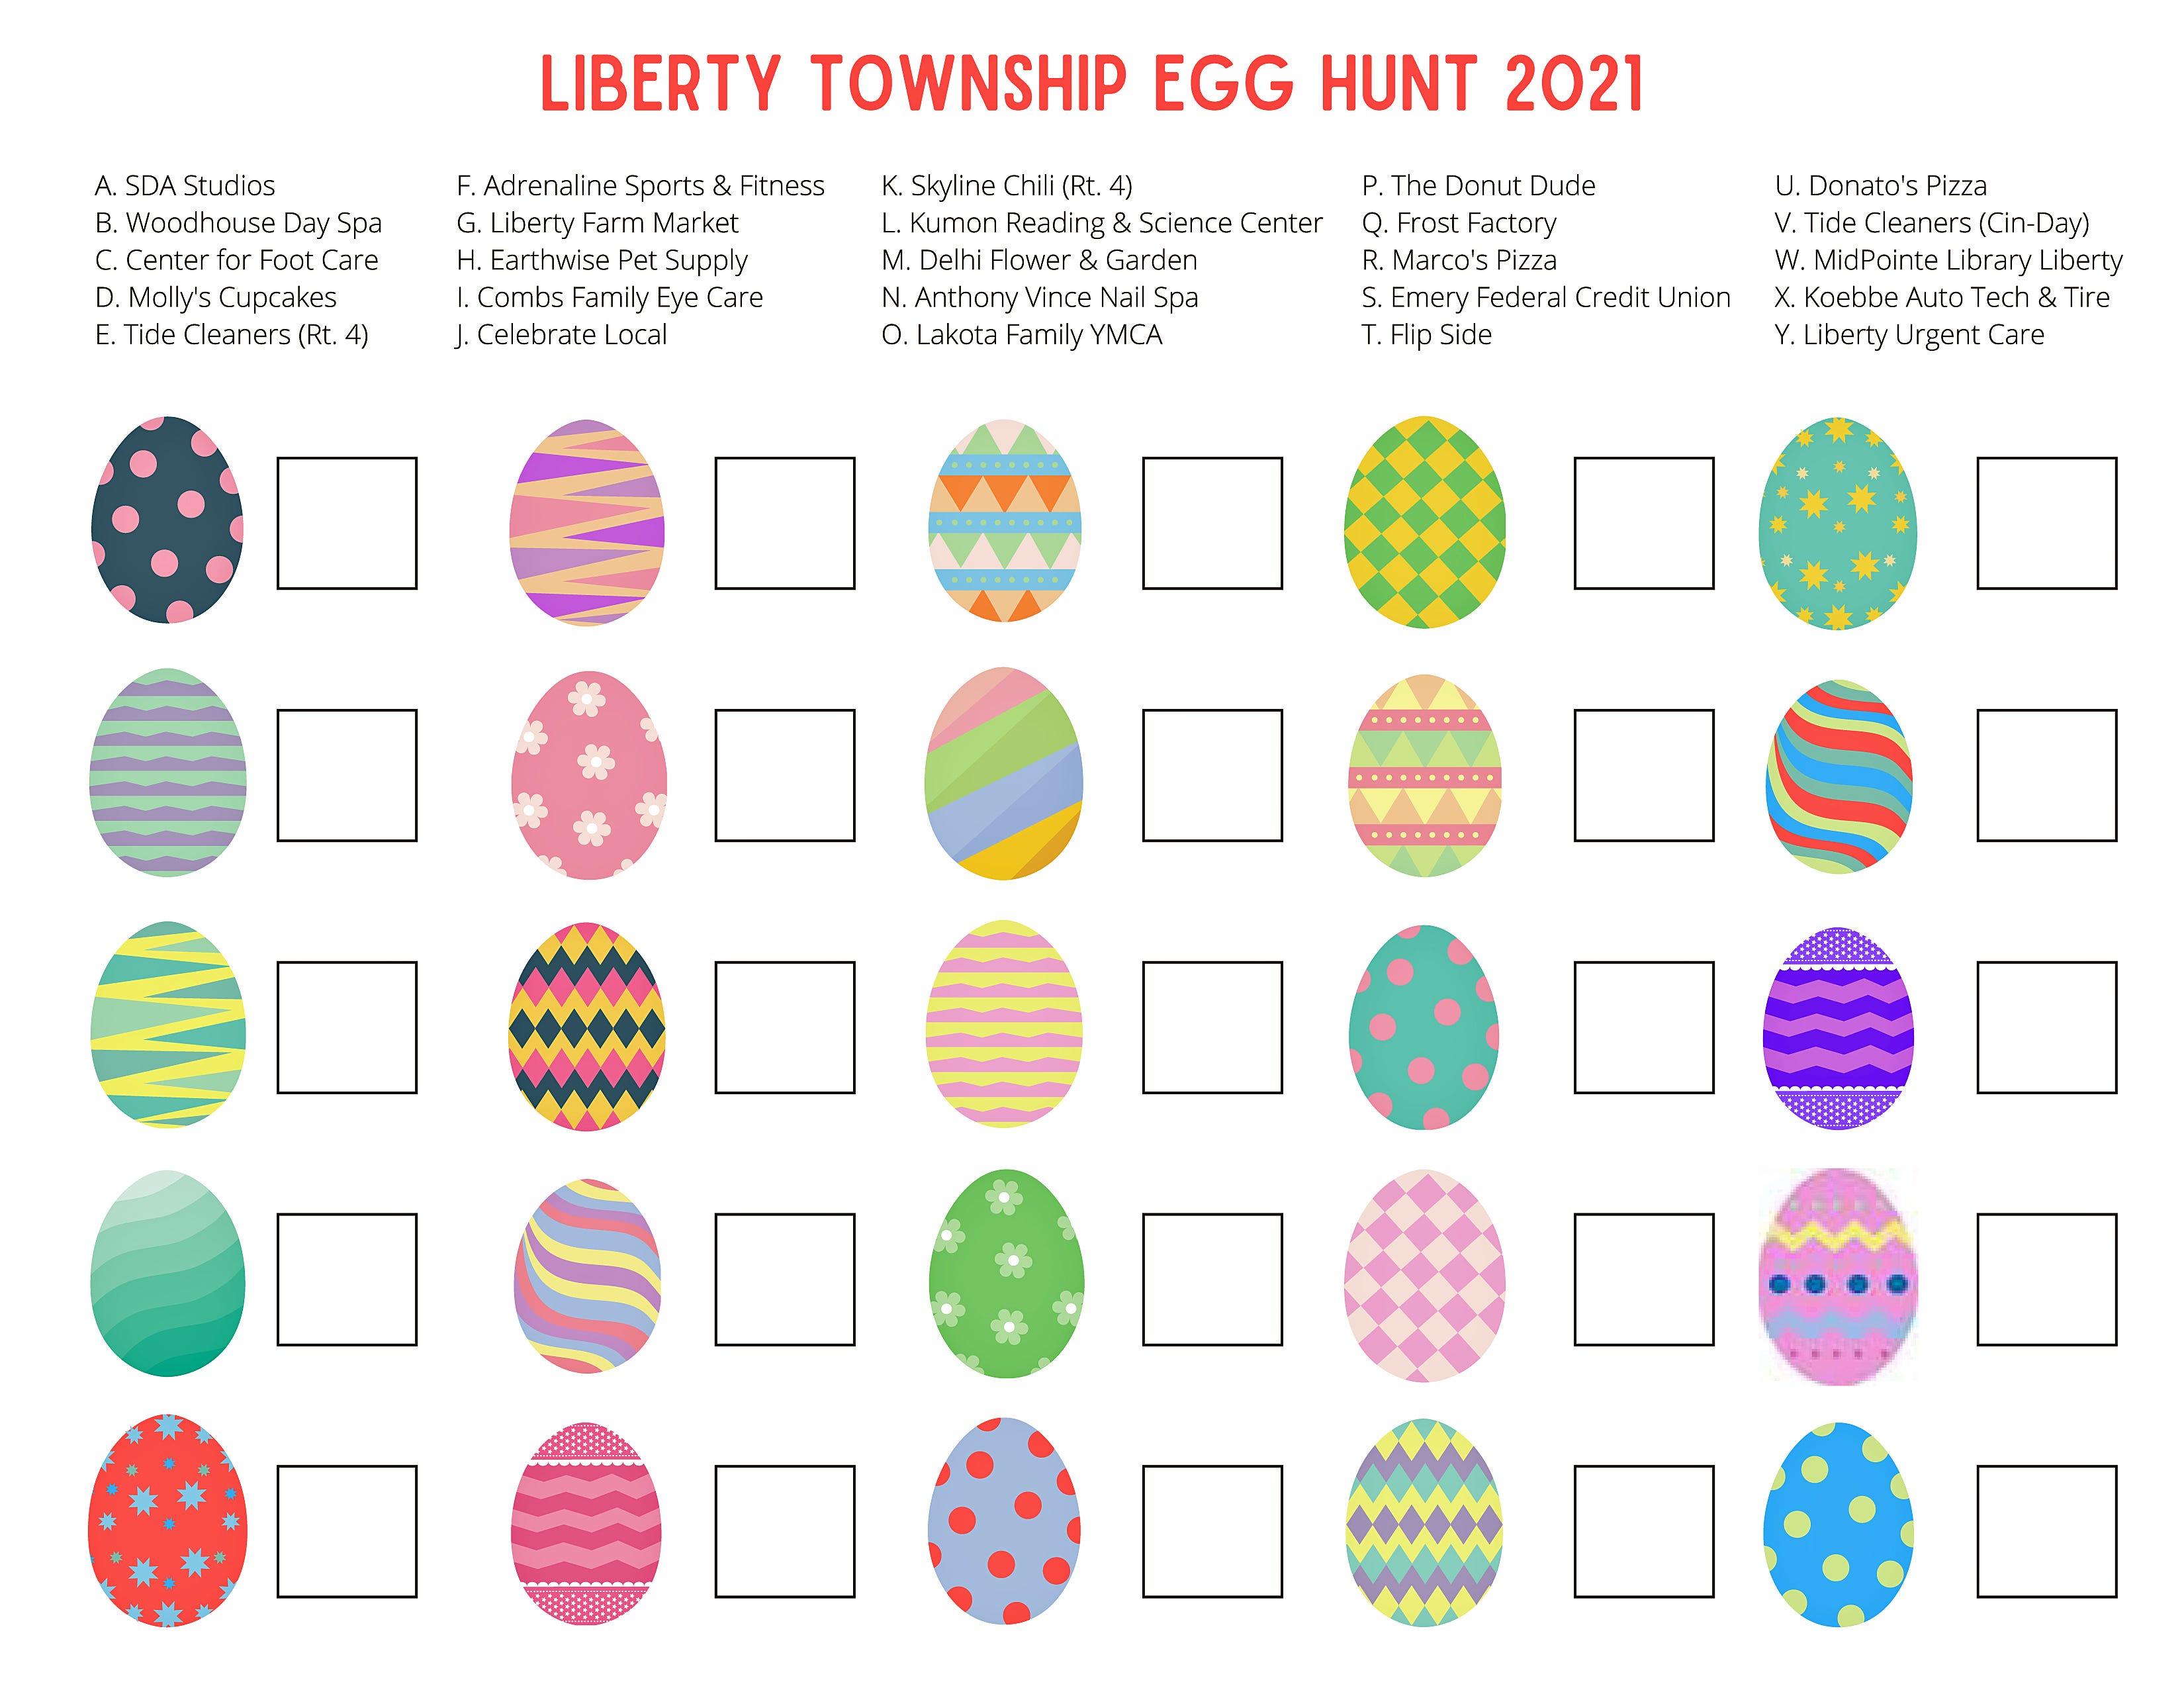 Liberty Township Sponsors A Traveling Easter Egg Hunt Due To Covid 19 Restrictions